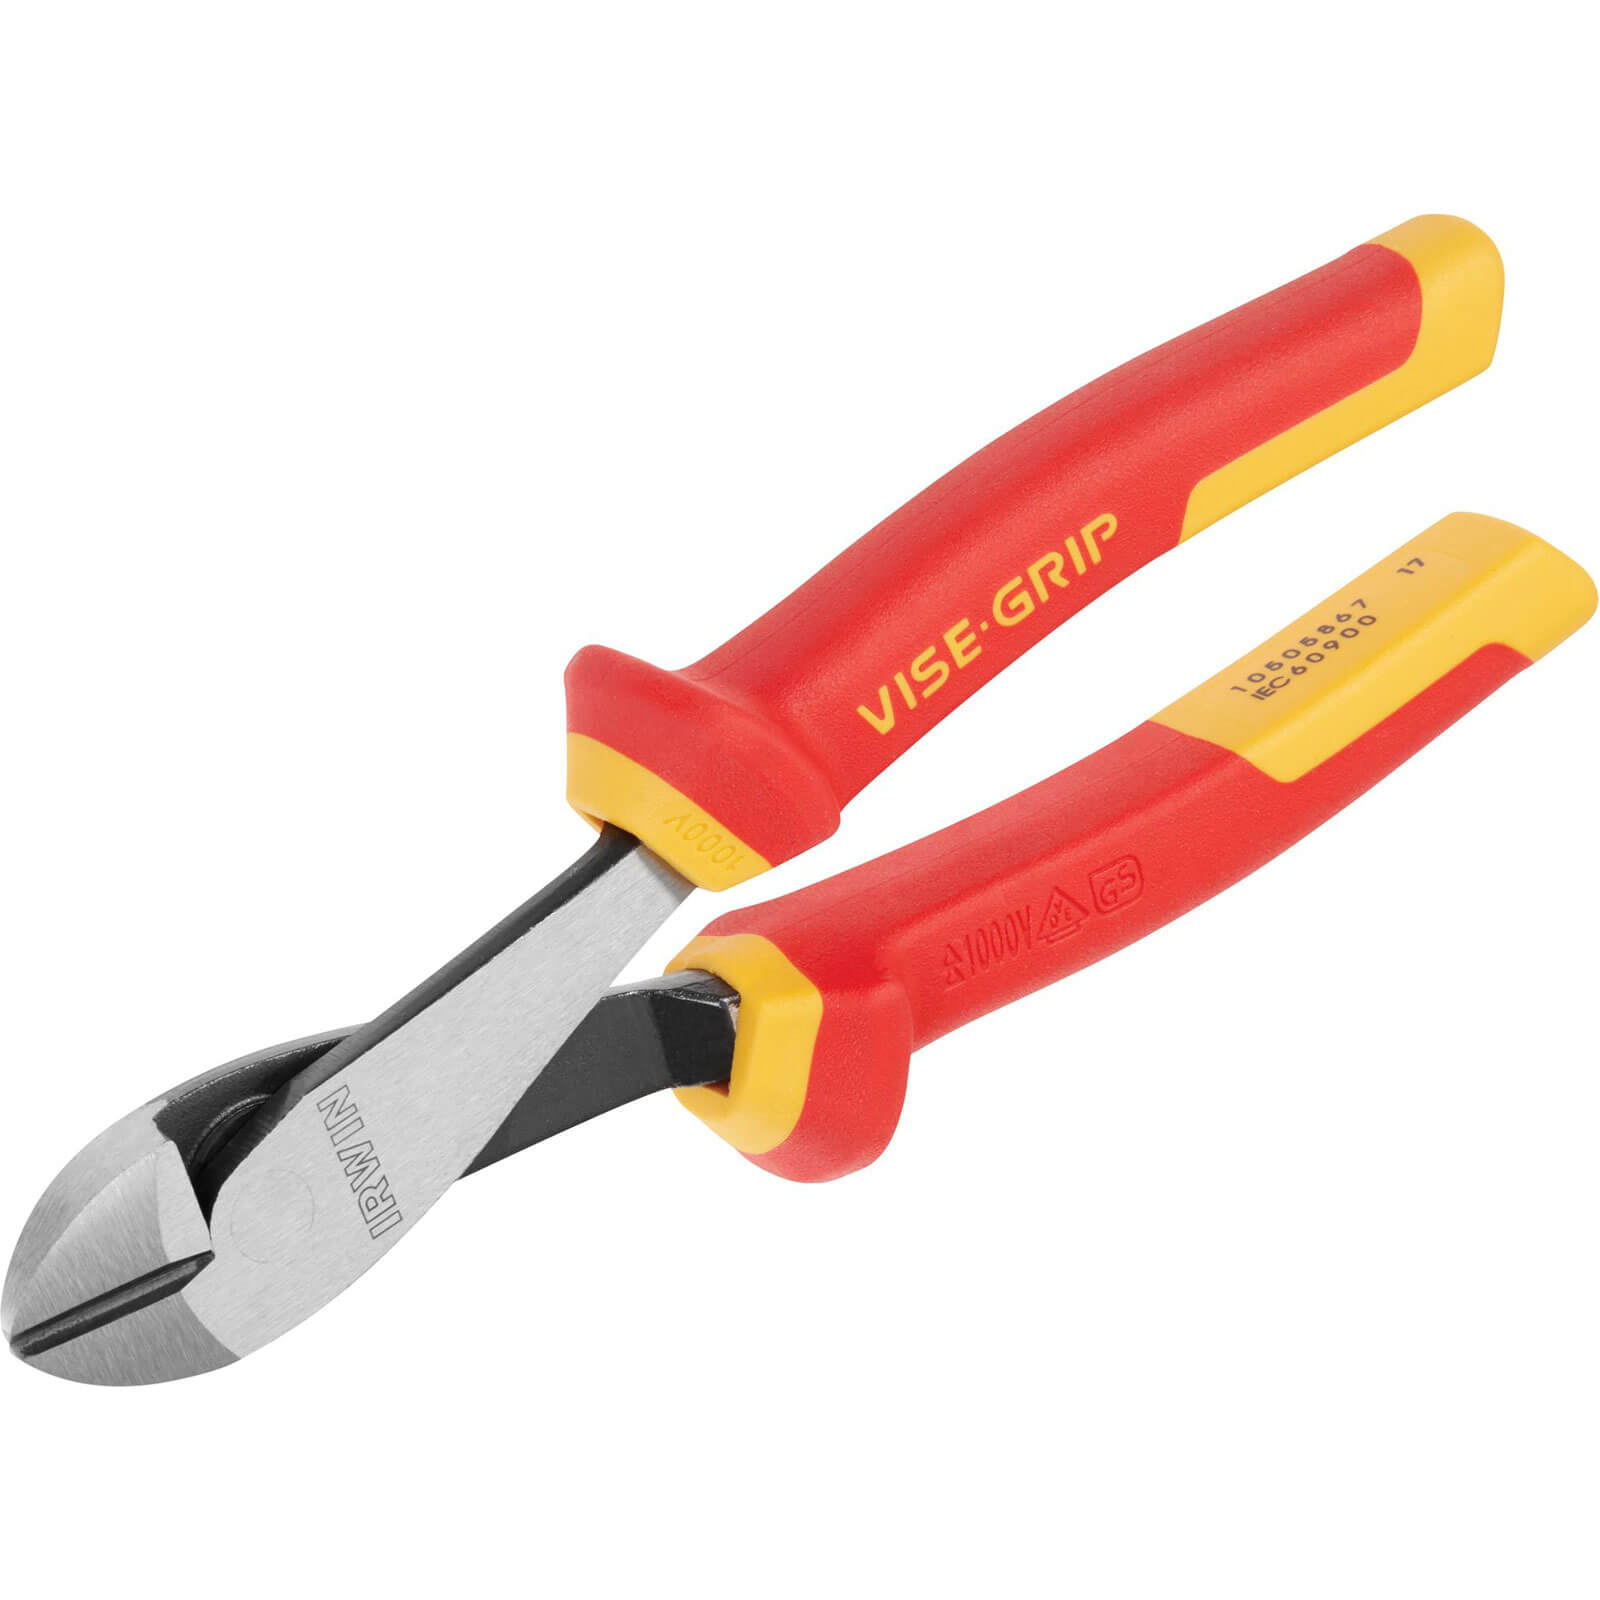 Image of Vise-Grip VDE Insulated Diagonal Cutting Pliers 200mm